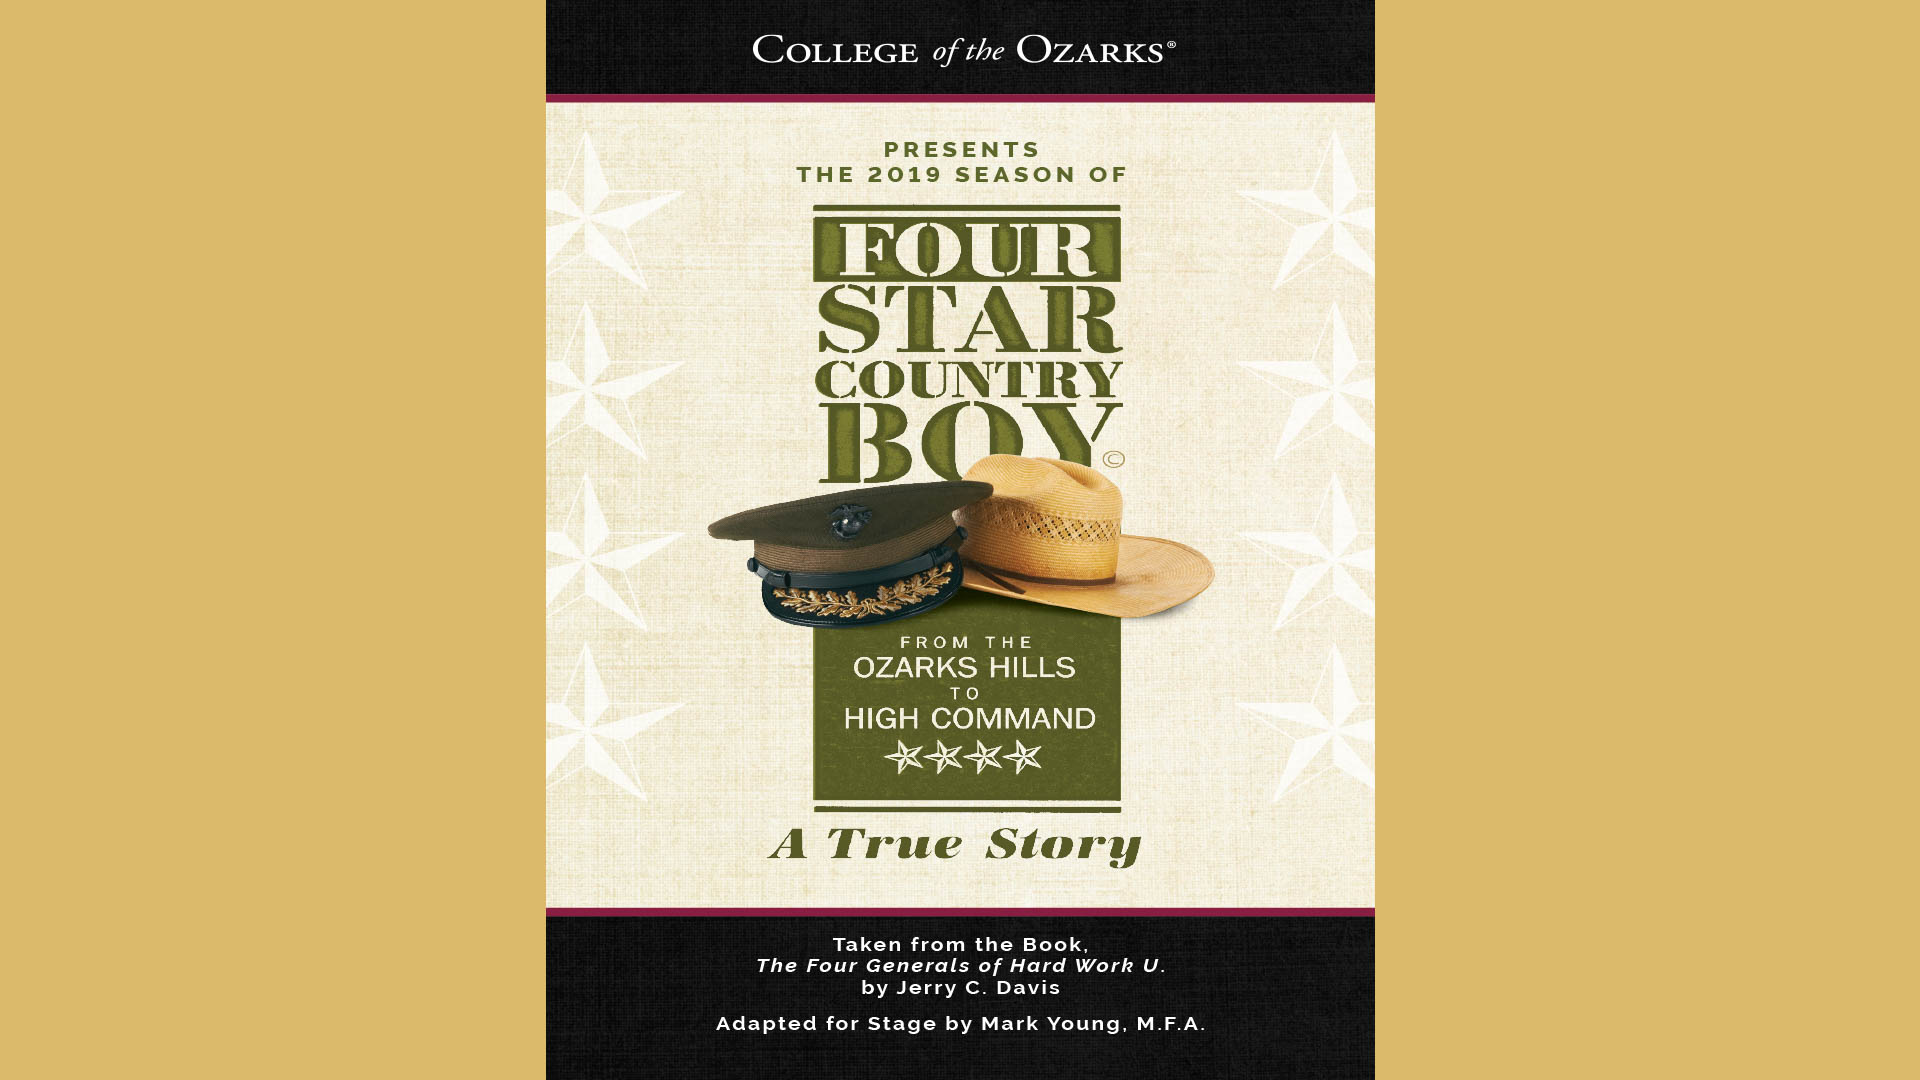 190924 1Time Four Star - “Four Star Country Boy” showing at The Keeter Center, October - November